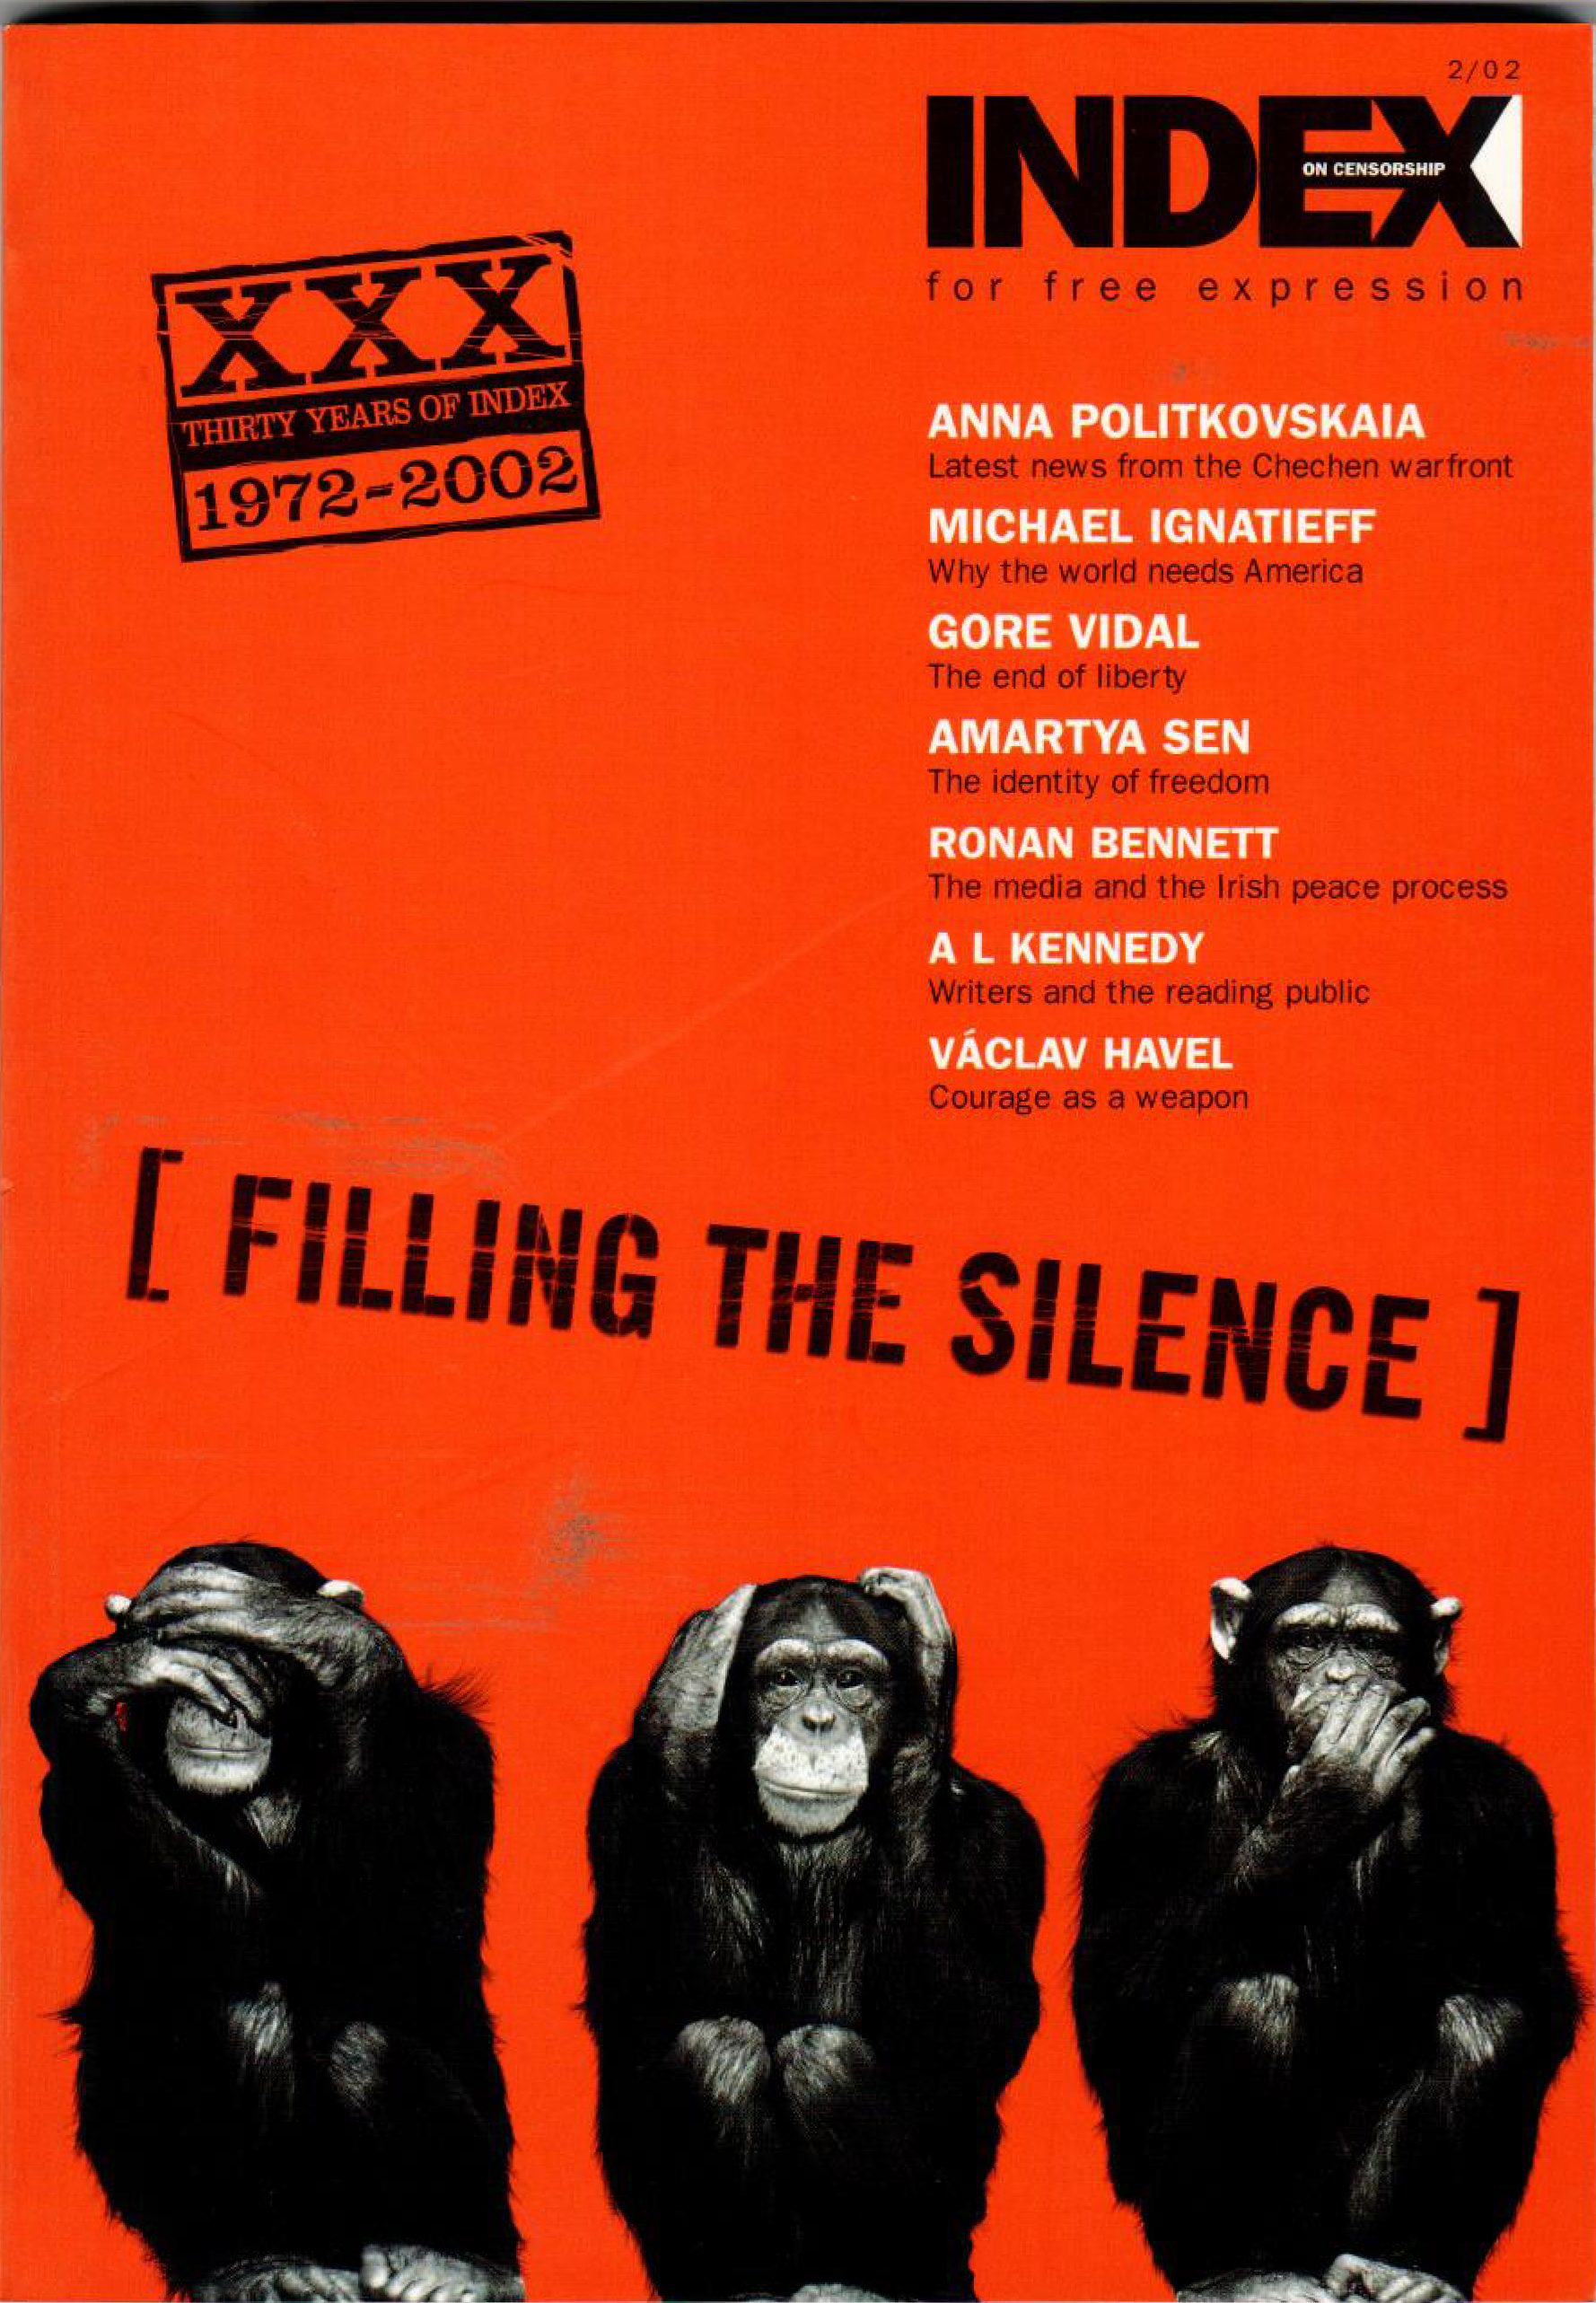 Filling the silence: 30 years of Index, the summer 2002 issue of Index on Censorship.